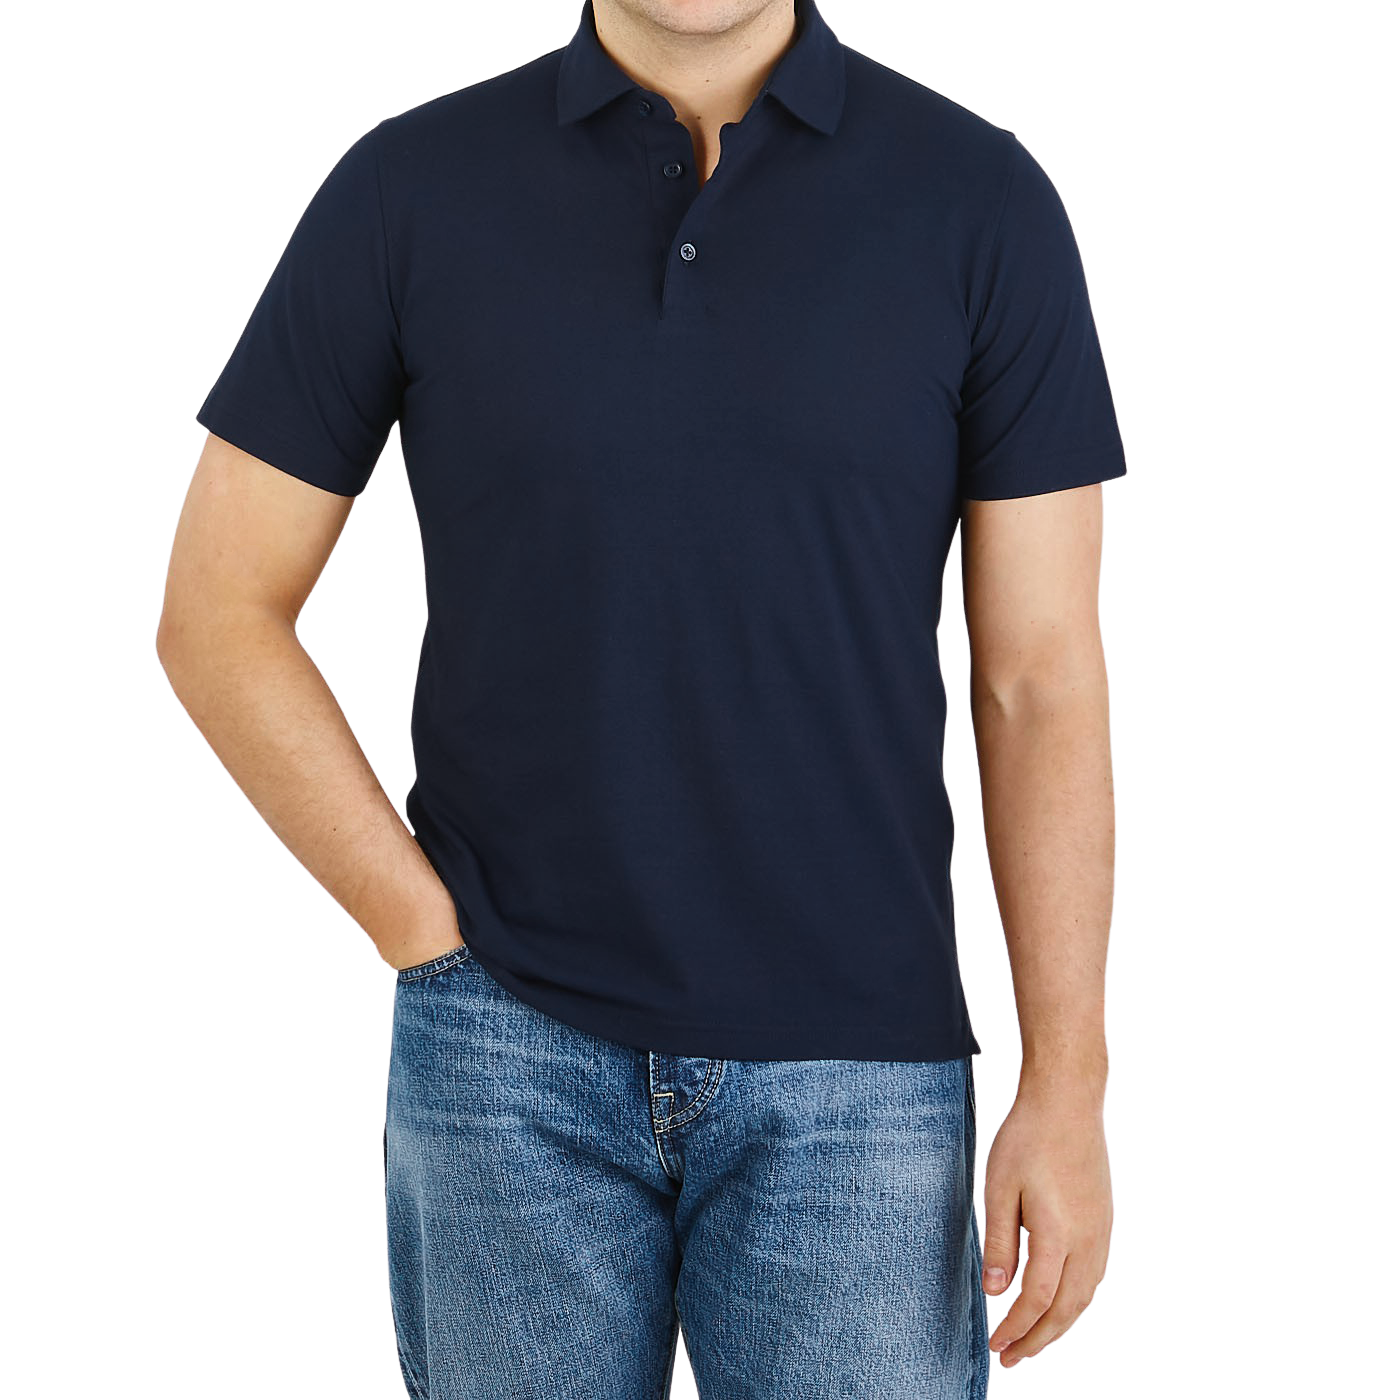 Navy Blue Polo Shirt Front | vlr.eng.br